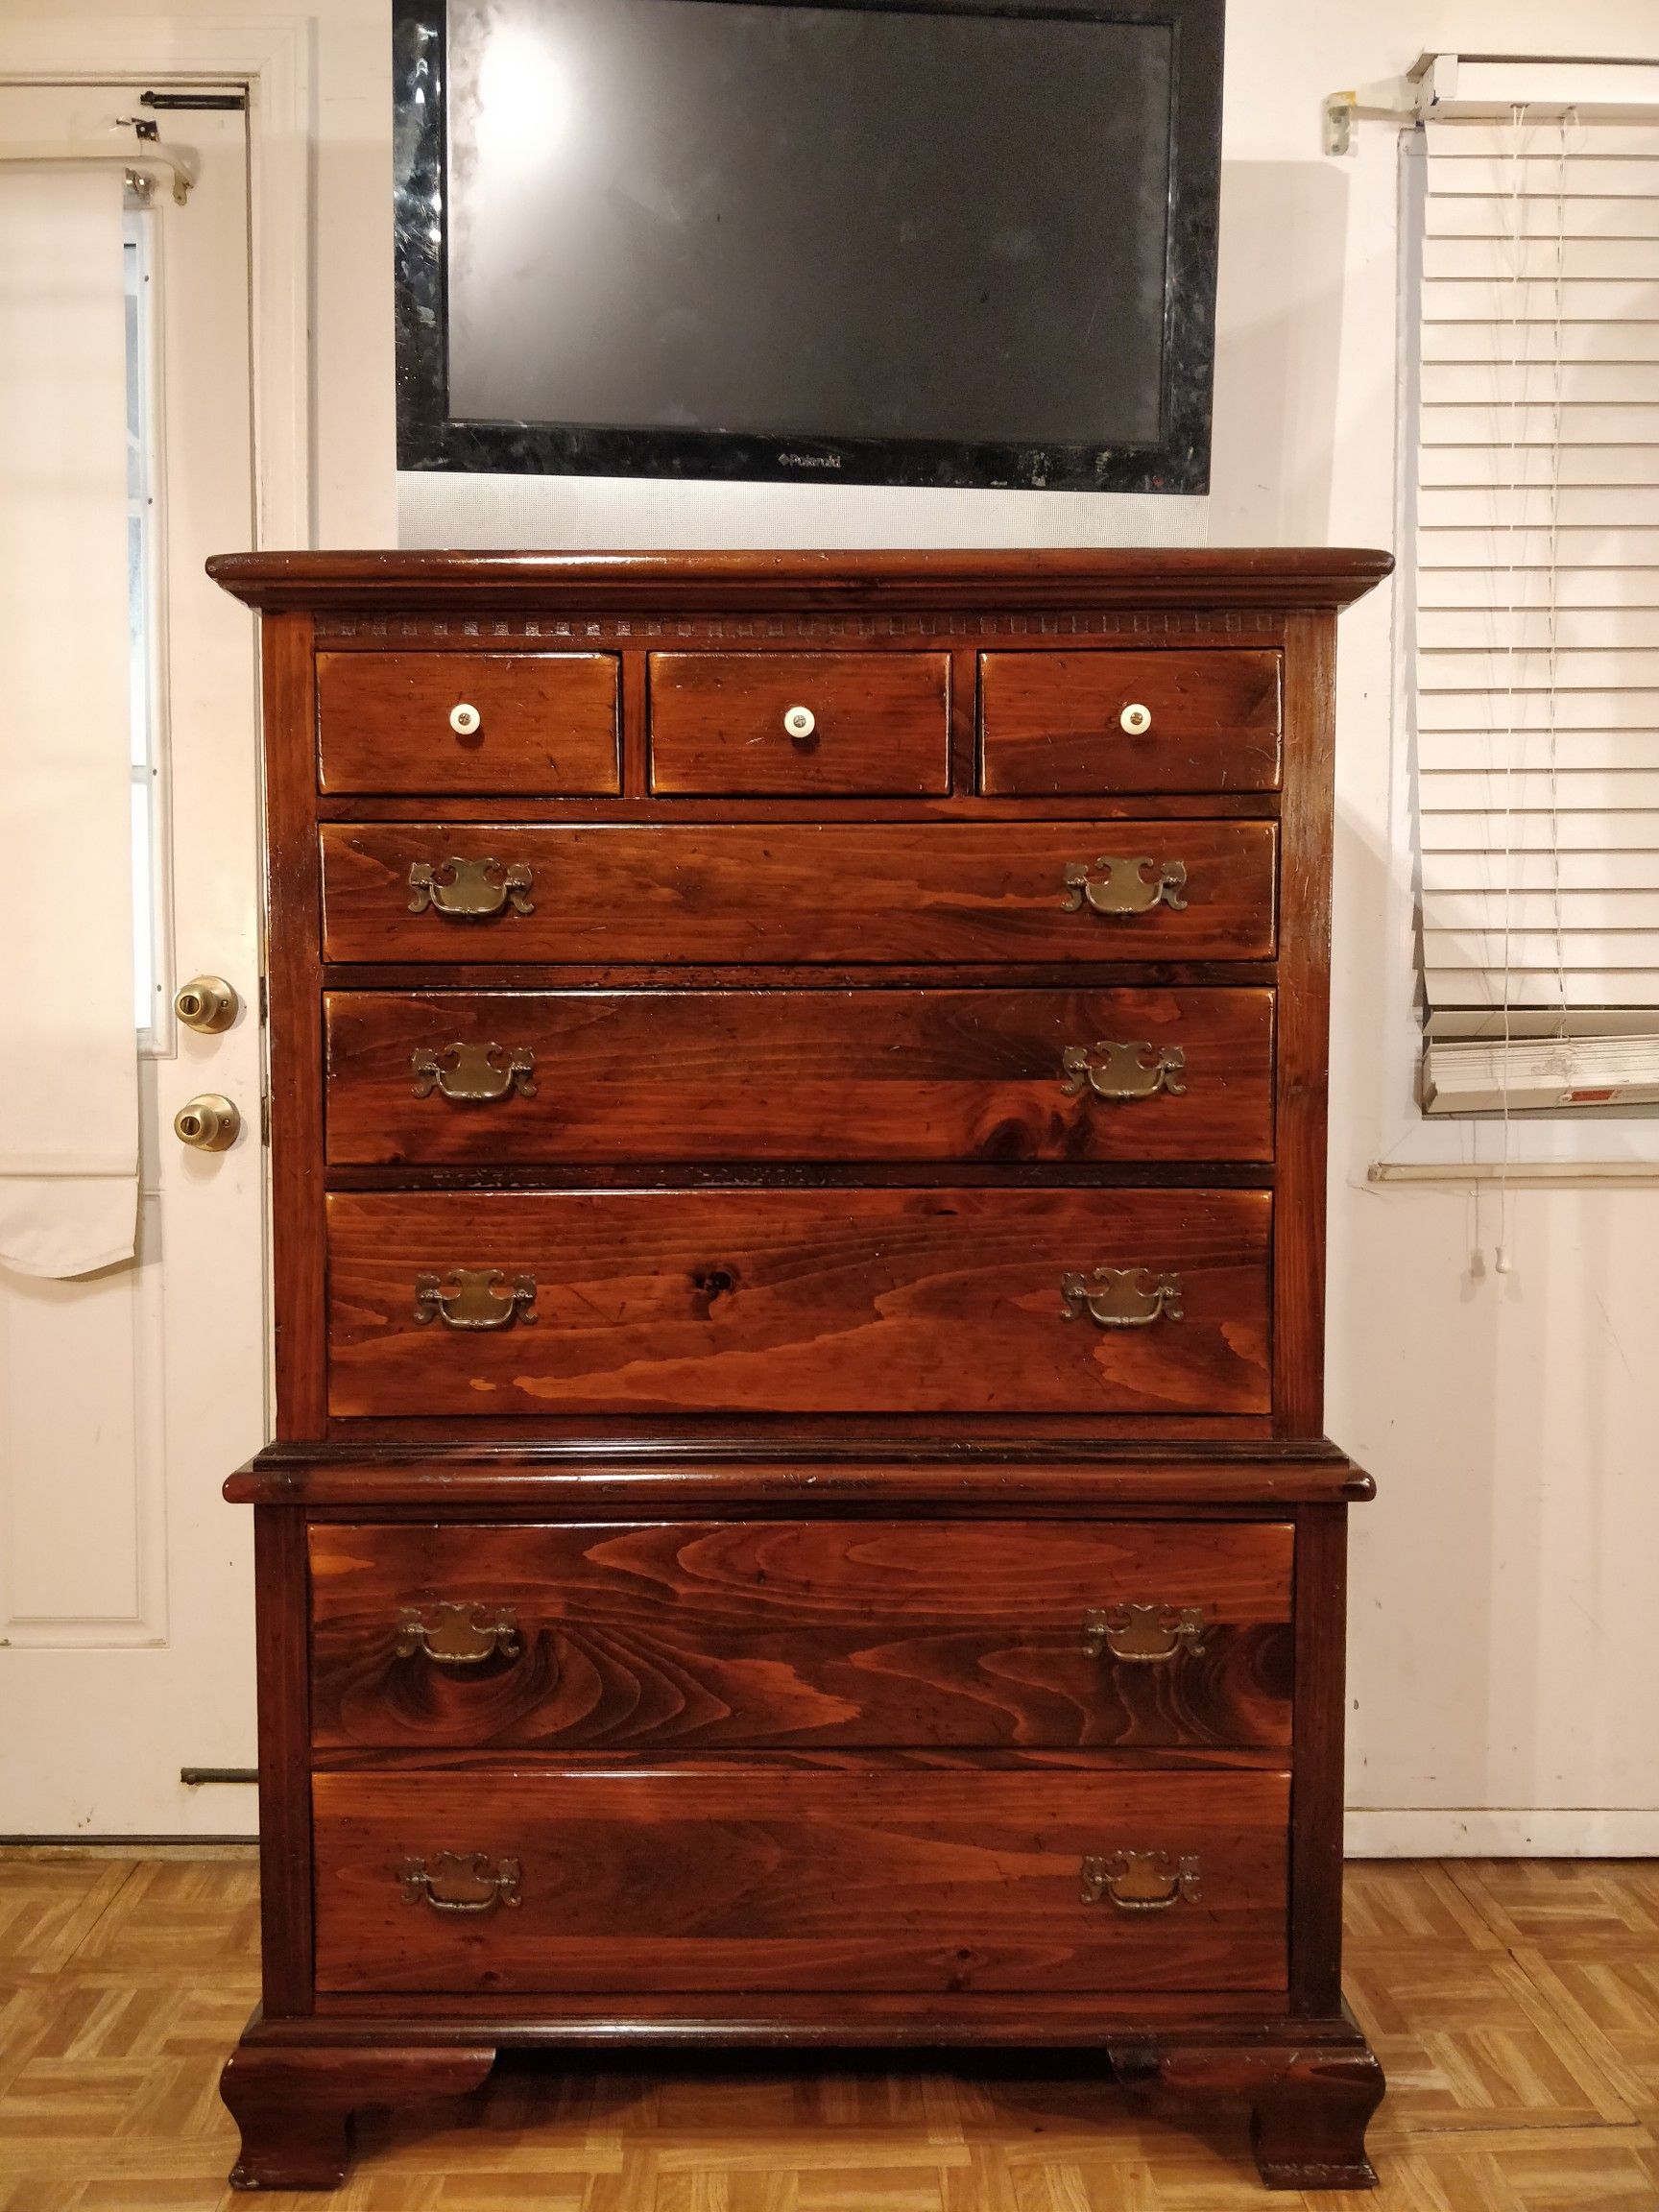 Nice solid wood tallboy ETHAN & ALLEN dresser with 8 drawers in good condition, all drawers working well, dovetail drawers. L38"*W21"*H54.3"